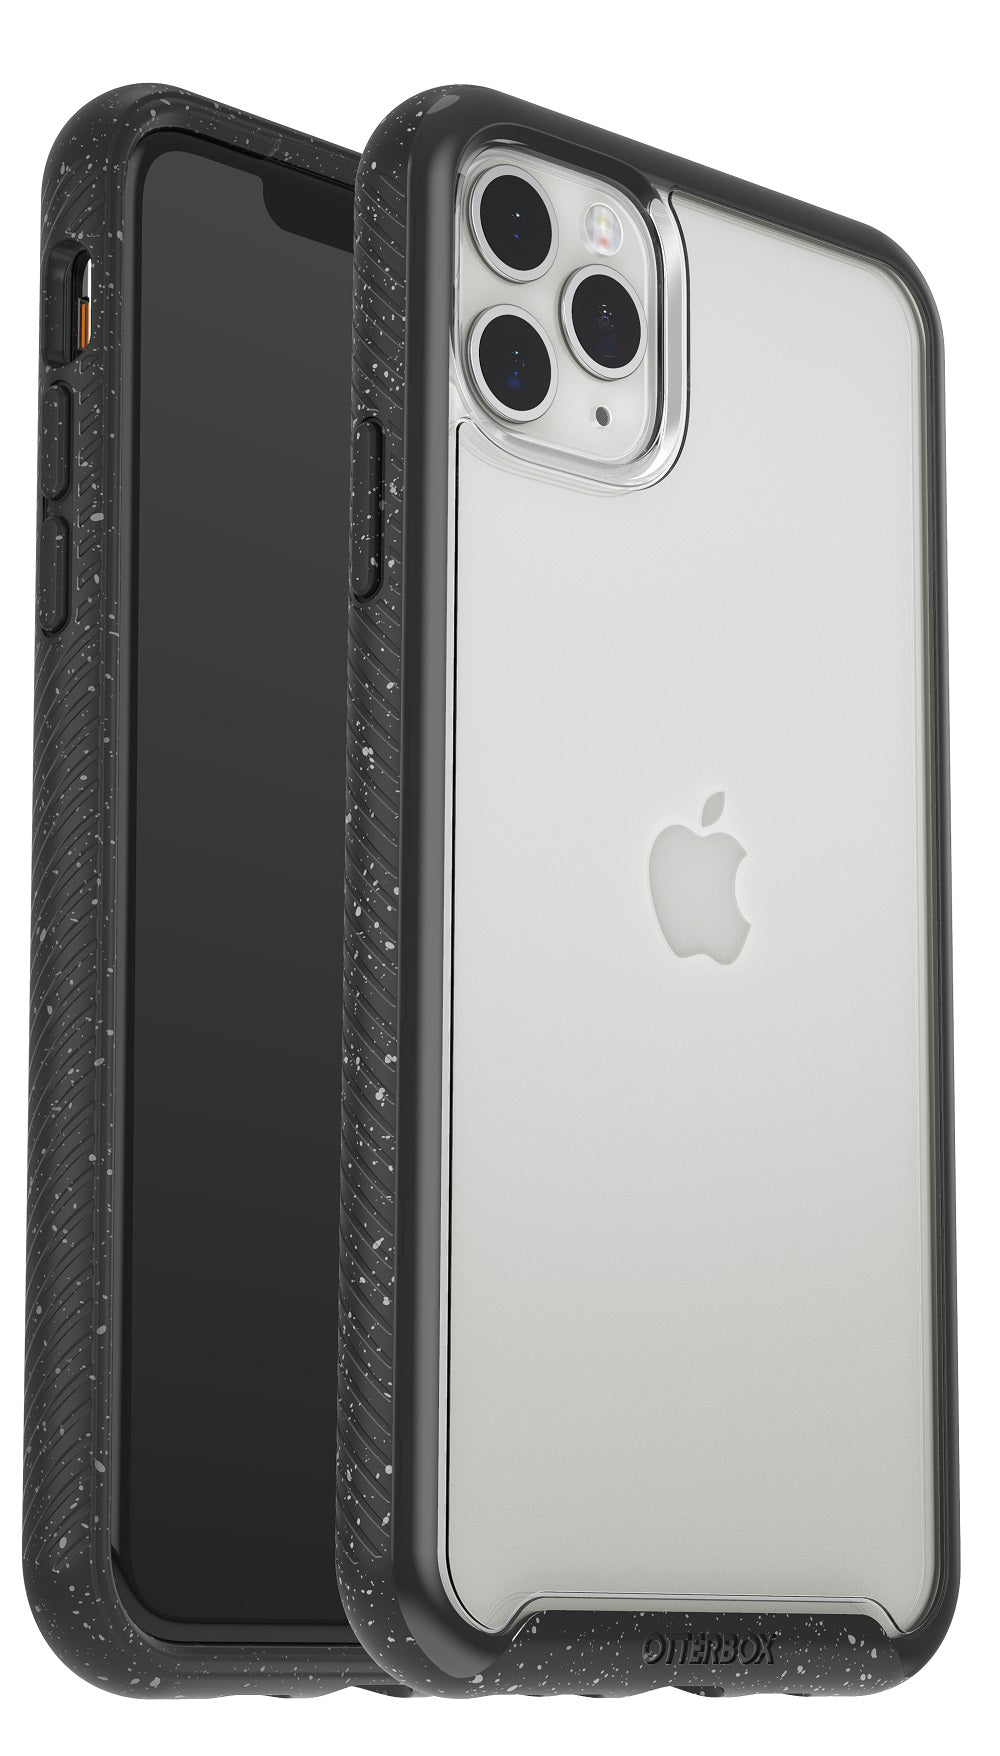 OtterBox Ultra Slim Clear Case for Apple iPhone 11 Pro Max - Dash (New)